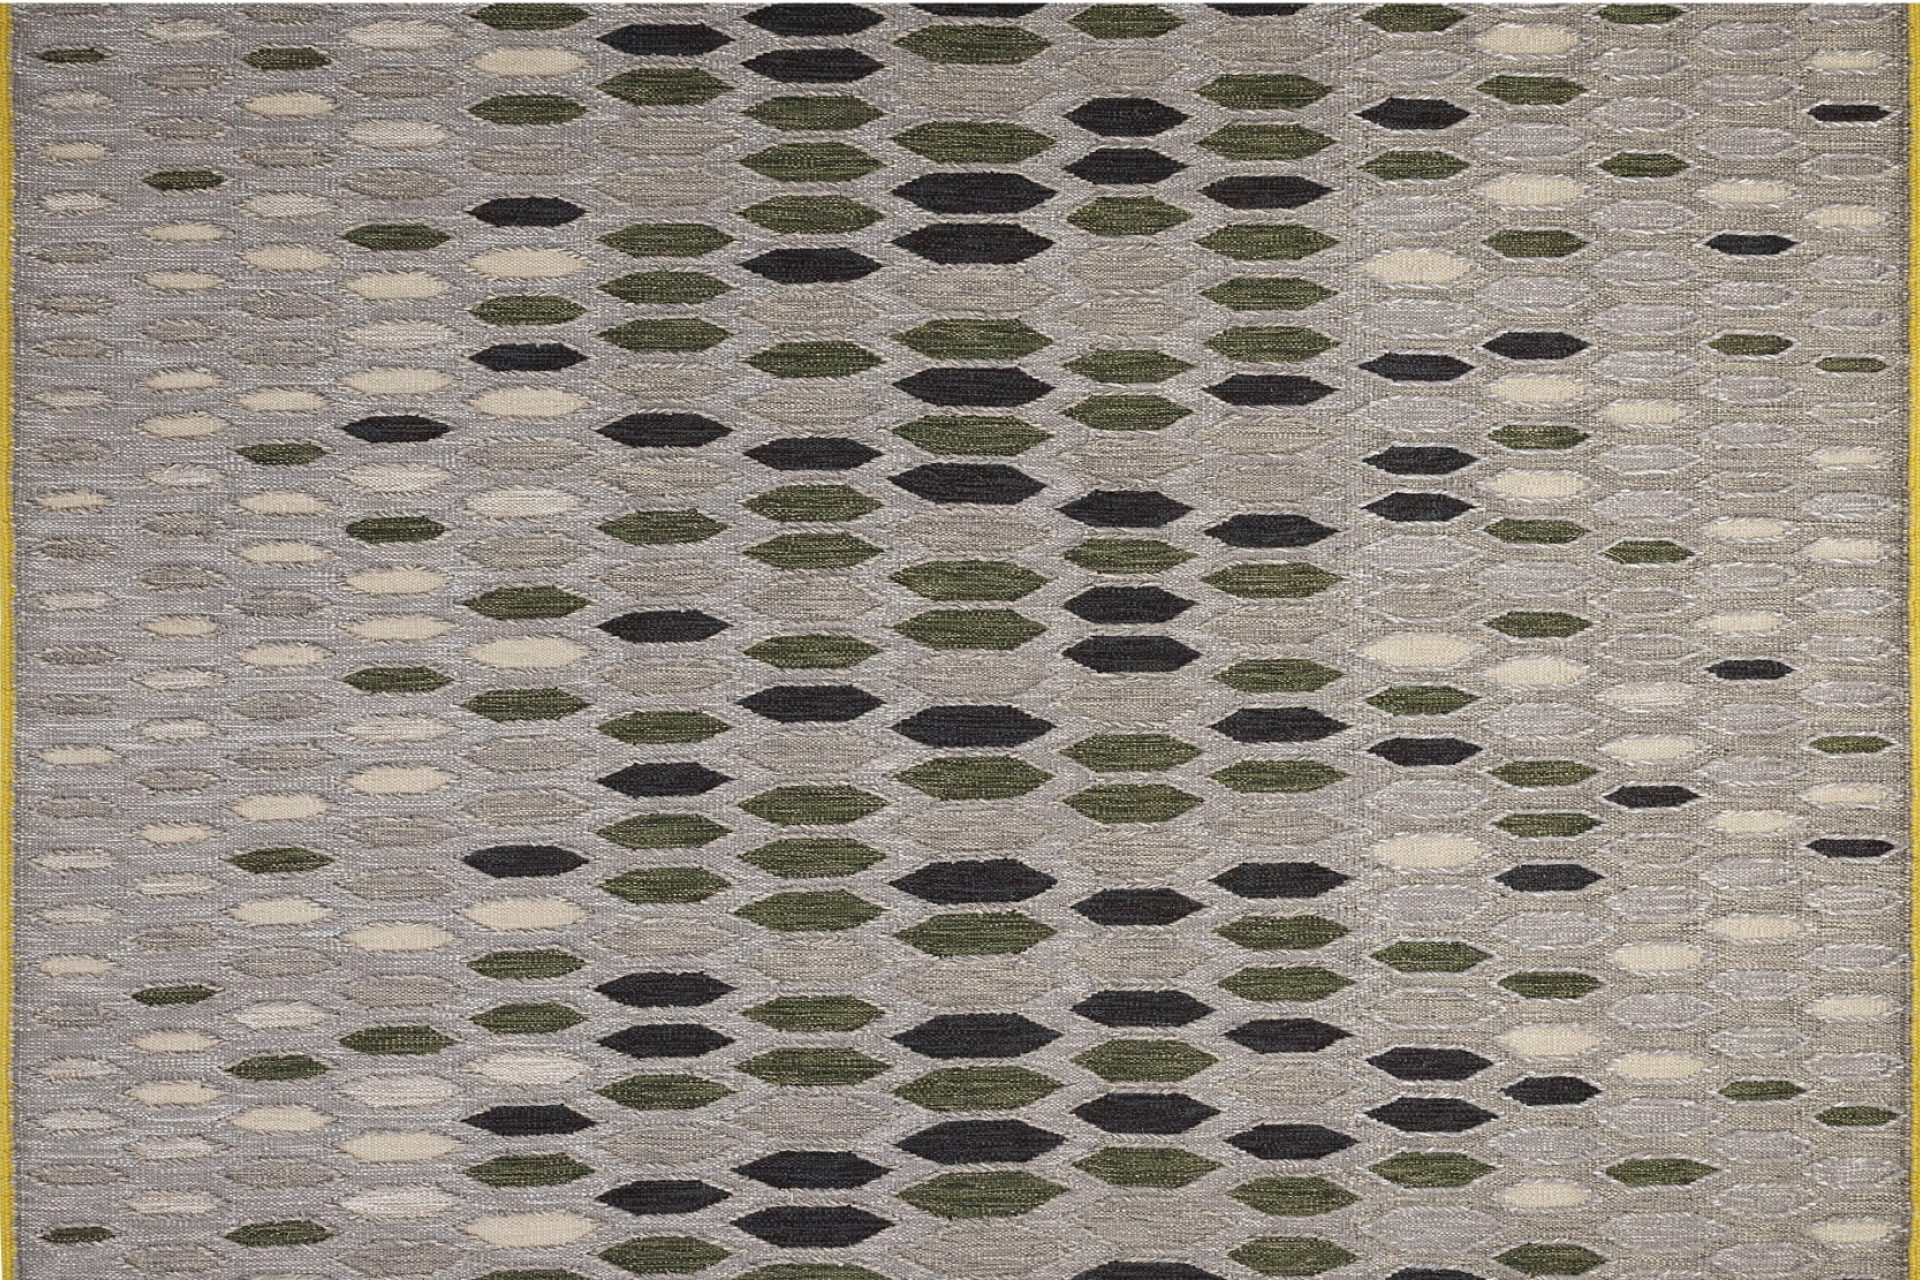 Above view of the rug with a hexagonal pattern in beige, green and grey